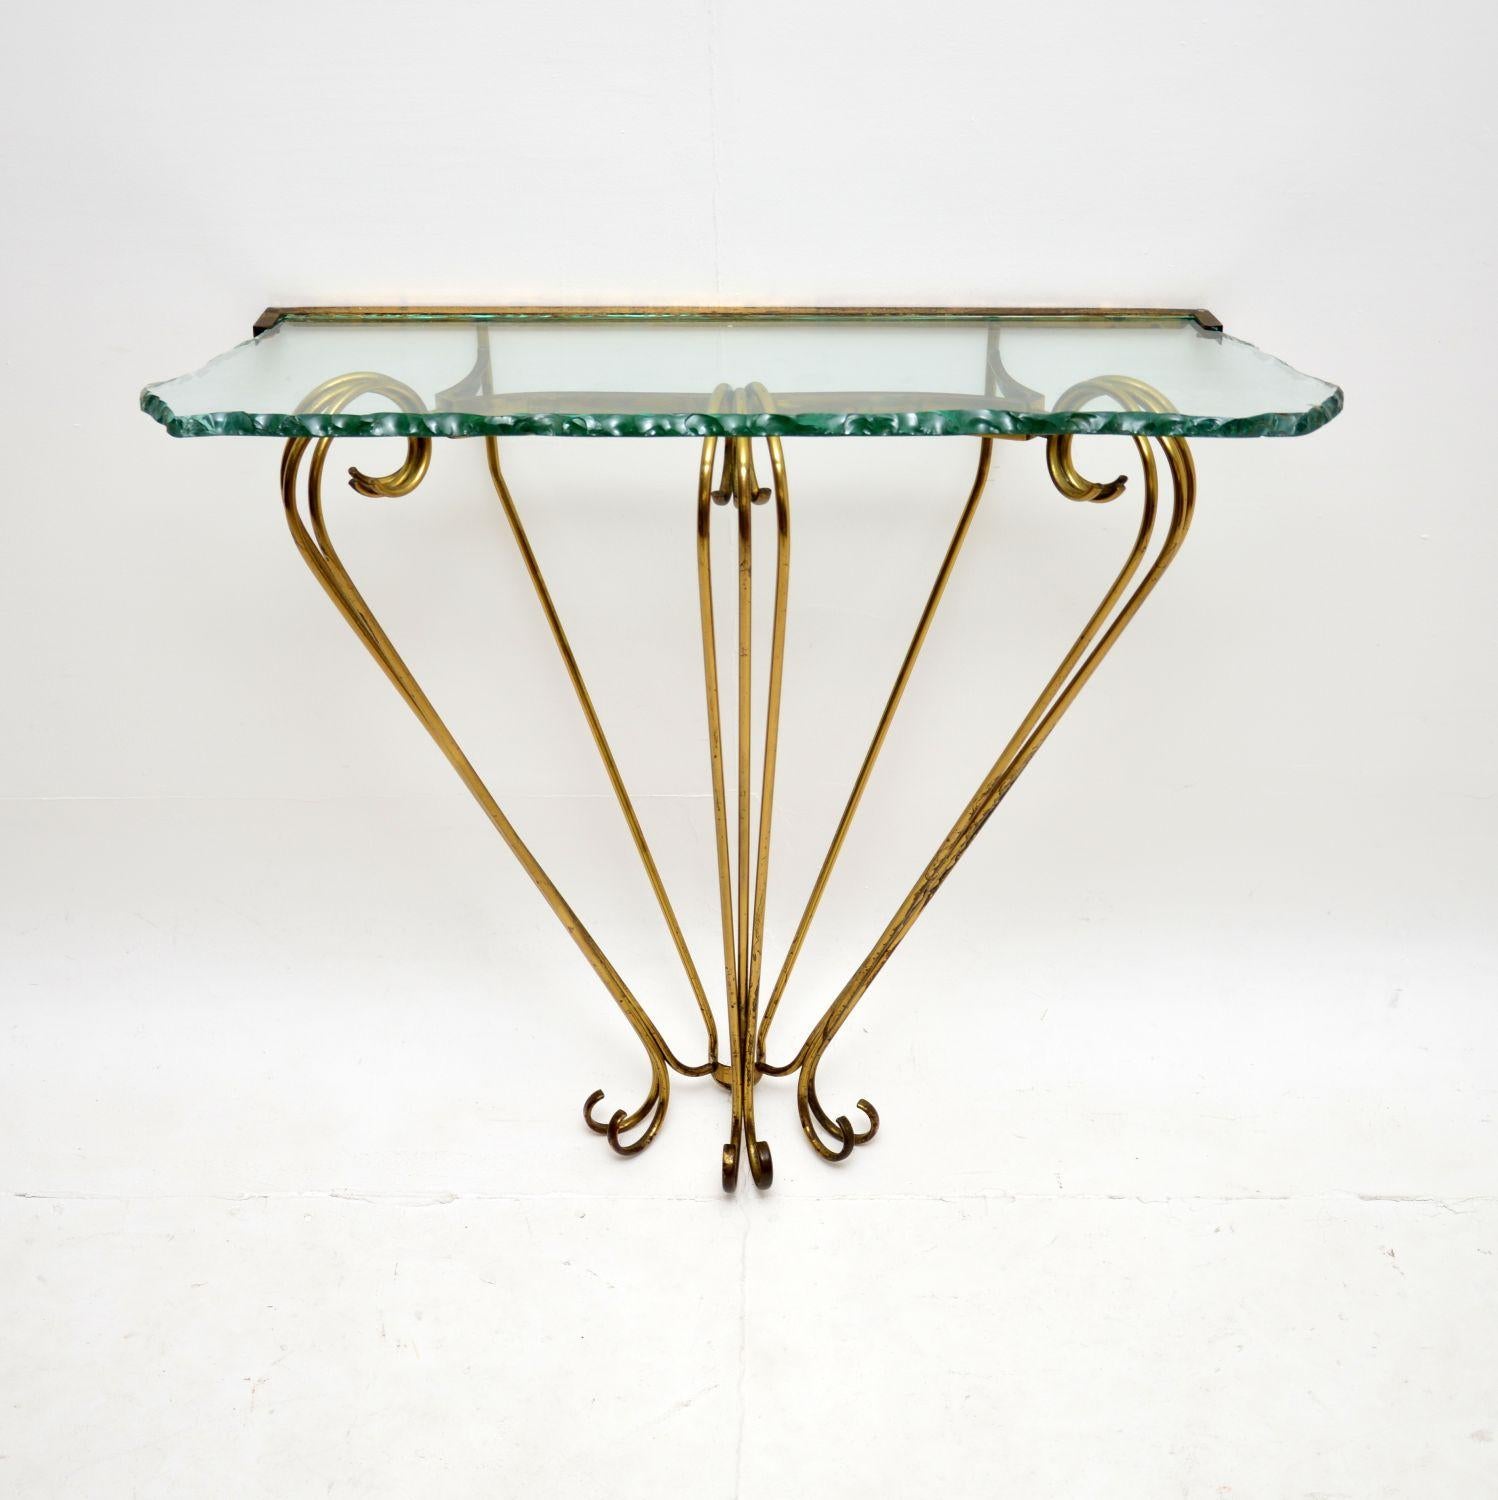 A stunning vintage Italian brass and glass console table by Pier Luigi Colli. This was recently imported from Italy, it dates from the 1970’s.

It has a gorgeous design and is of superb quality. The solid hammered brass frame has beautiful curves,